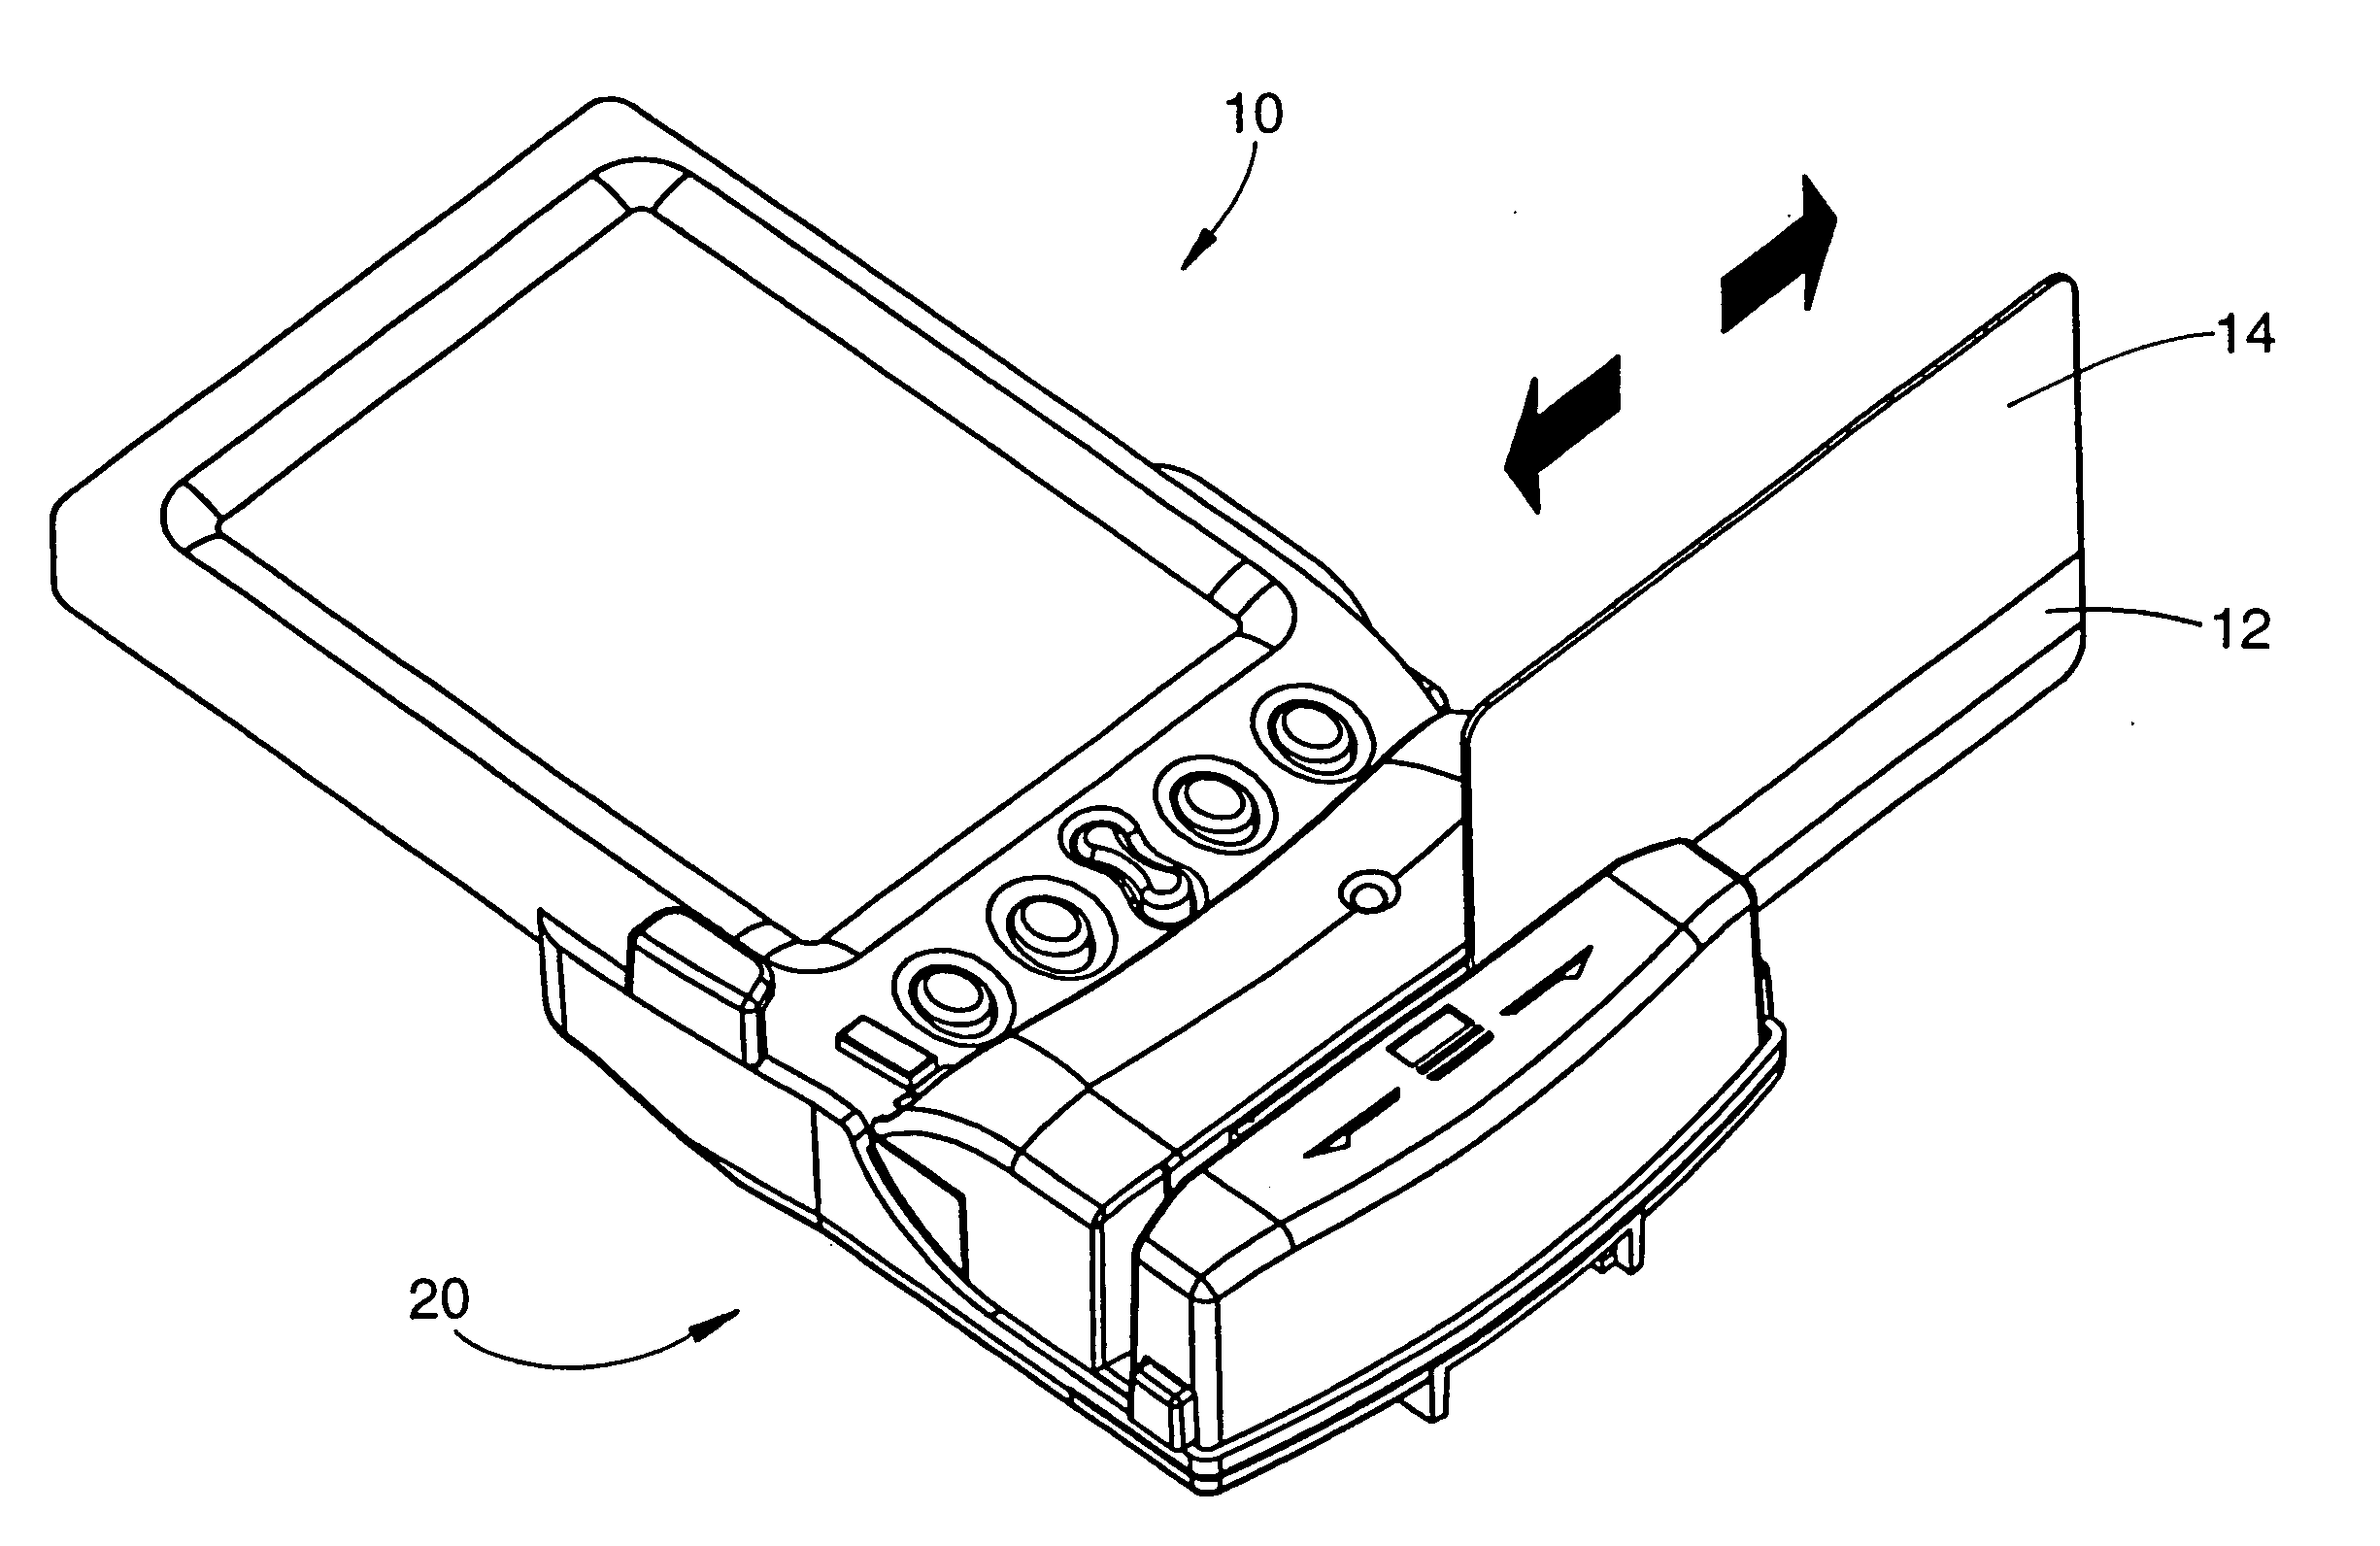 Magnetic stripe reader with power management control for attachment to a PDA device